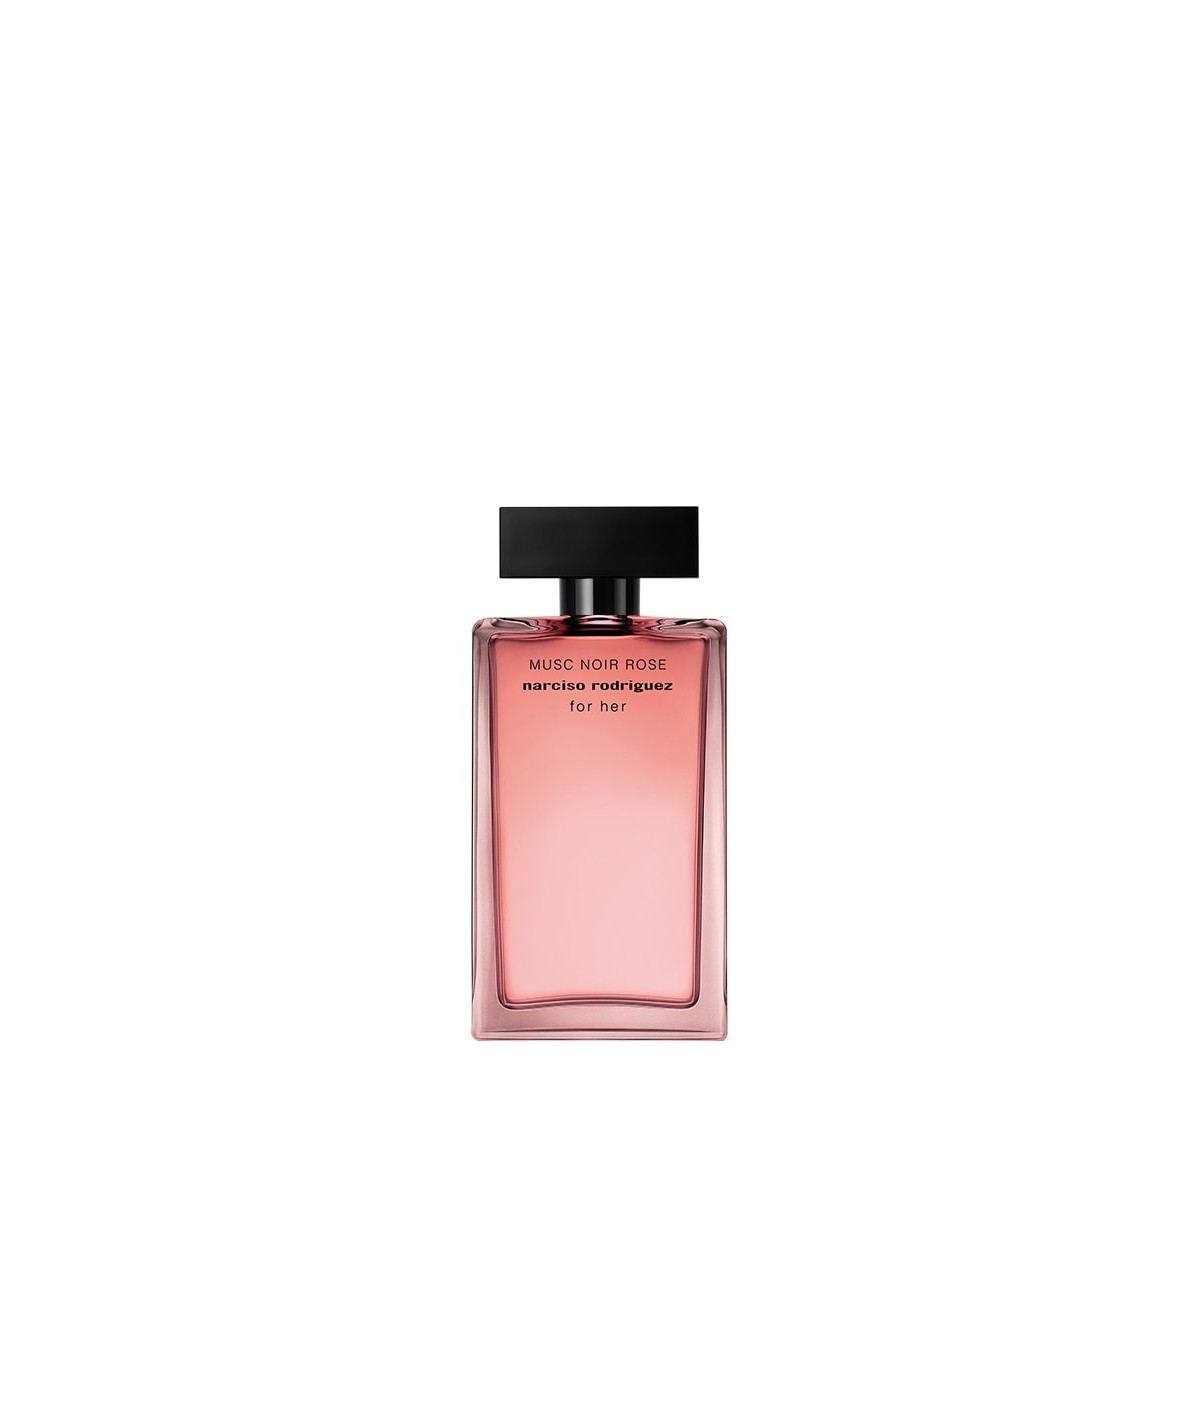 NARCISO RODRIGUEZ - "MUSC NOIRE ROSE" FOR HER EDP